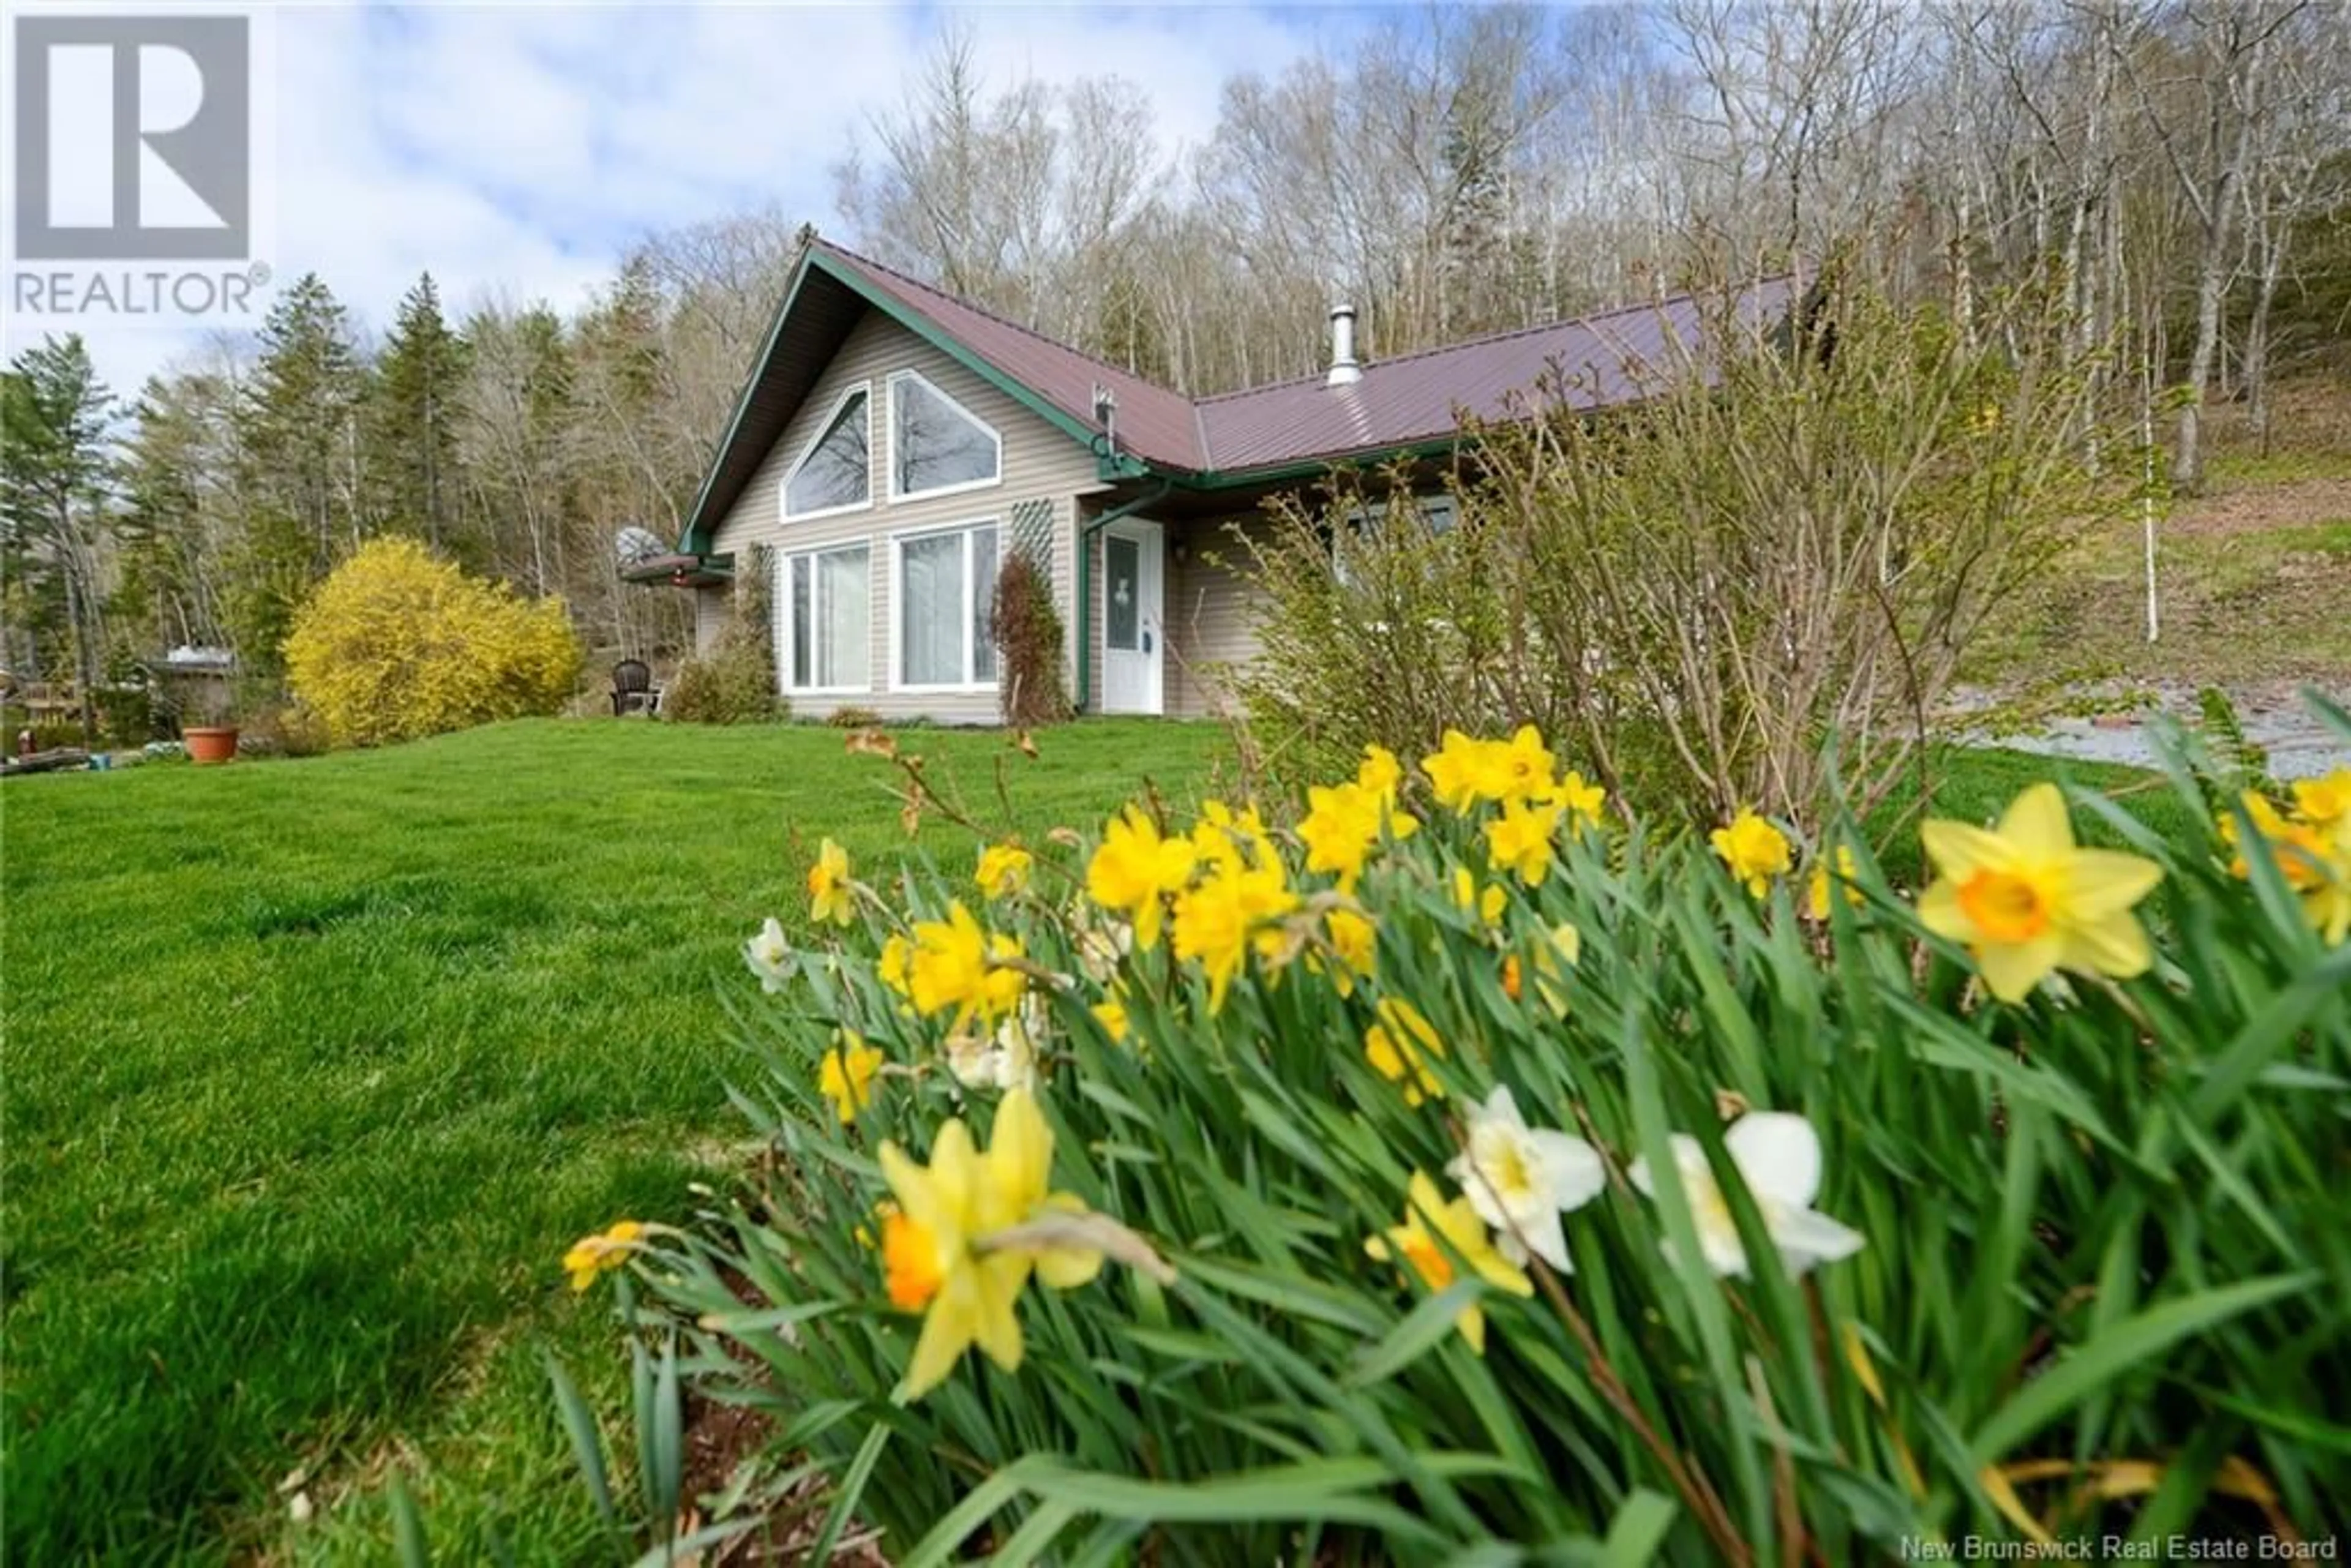 Cottage for 264 West Tennants Cove Road, Kars New Brunswick E5T3G6